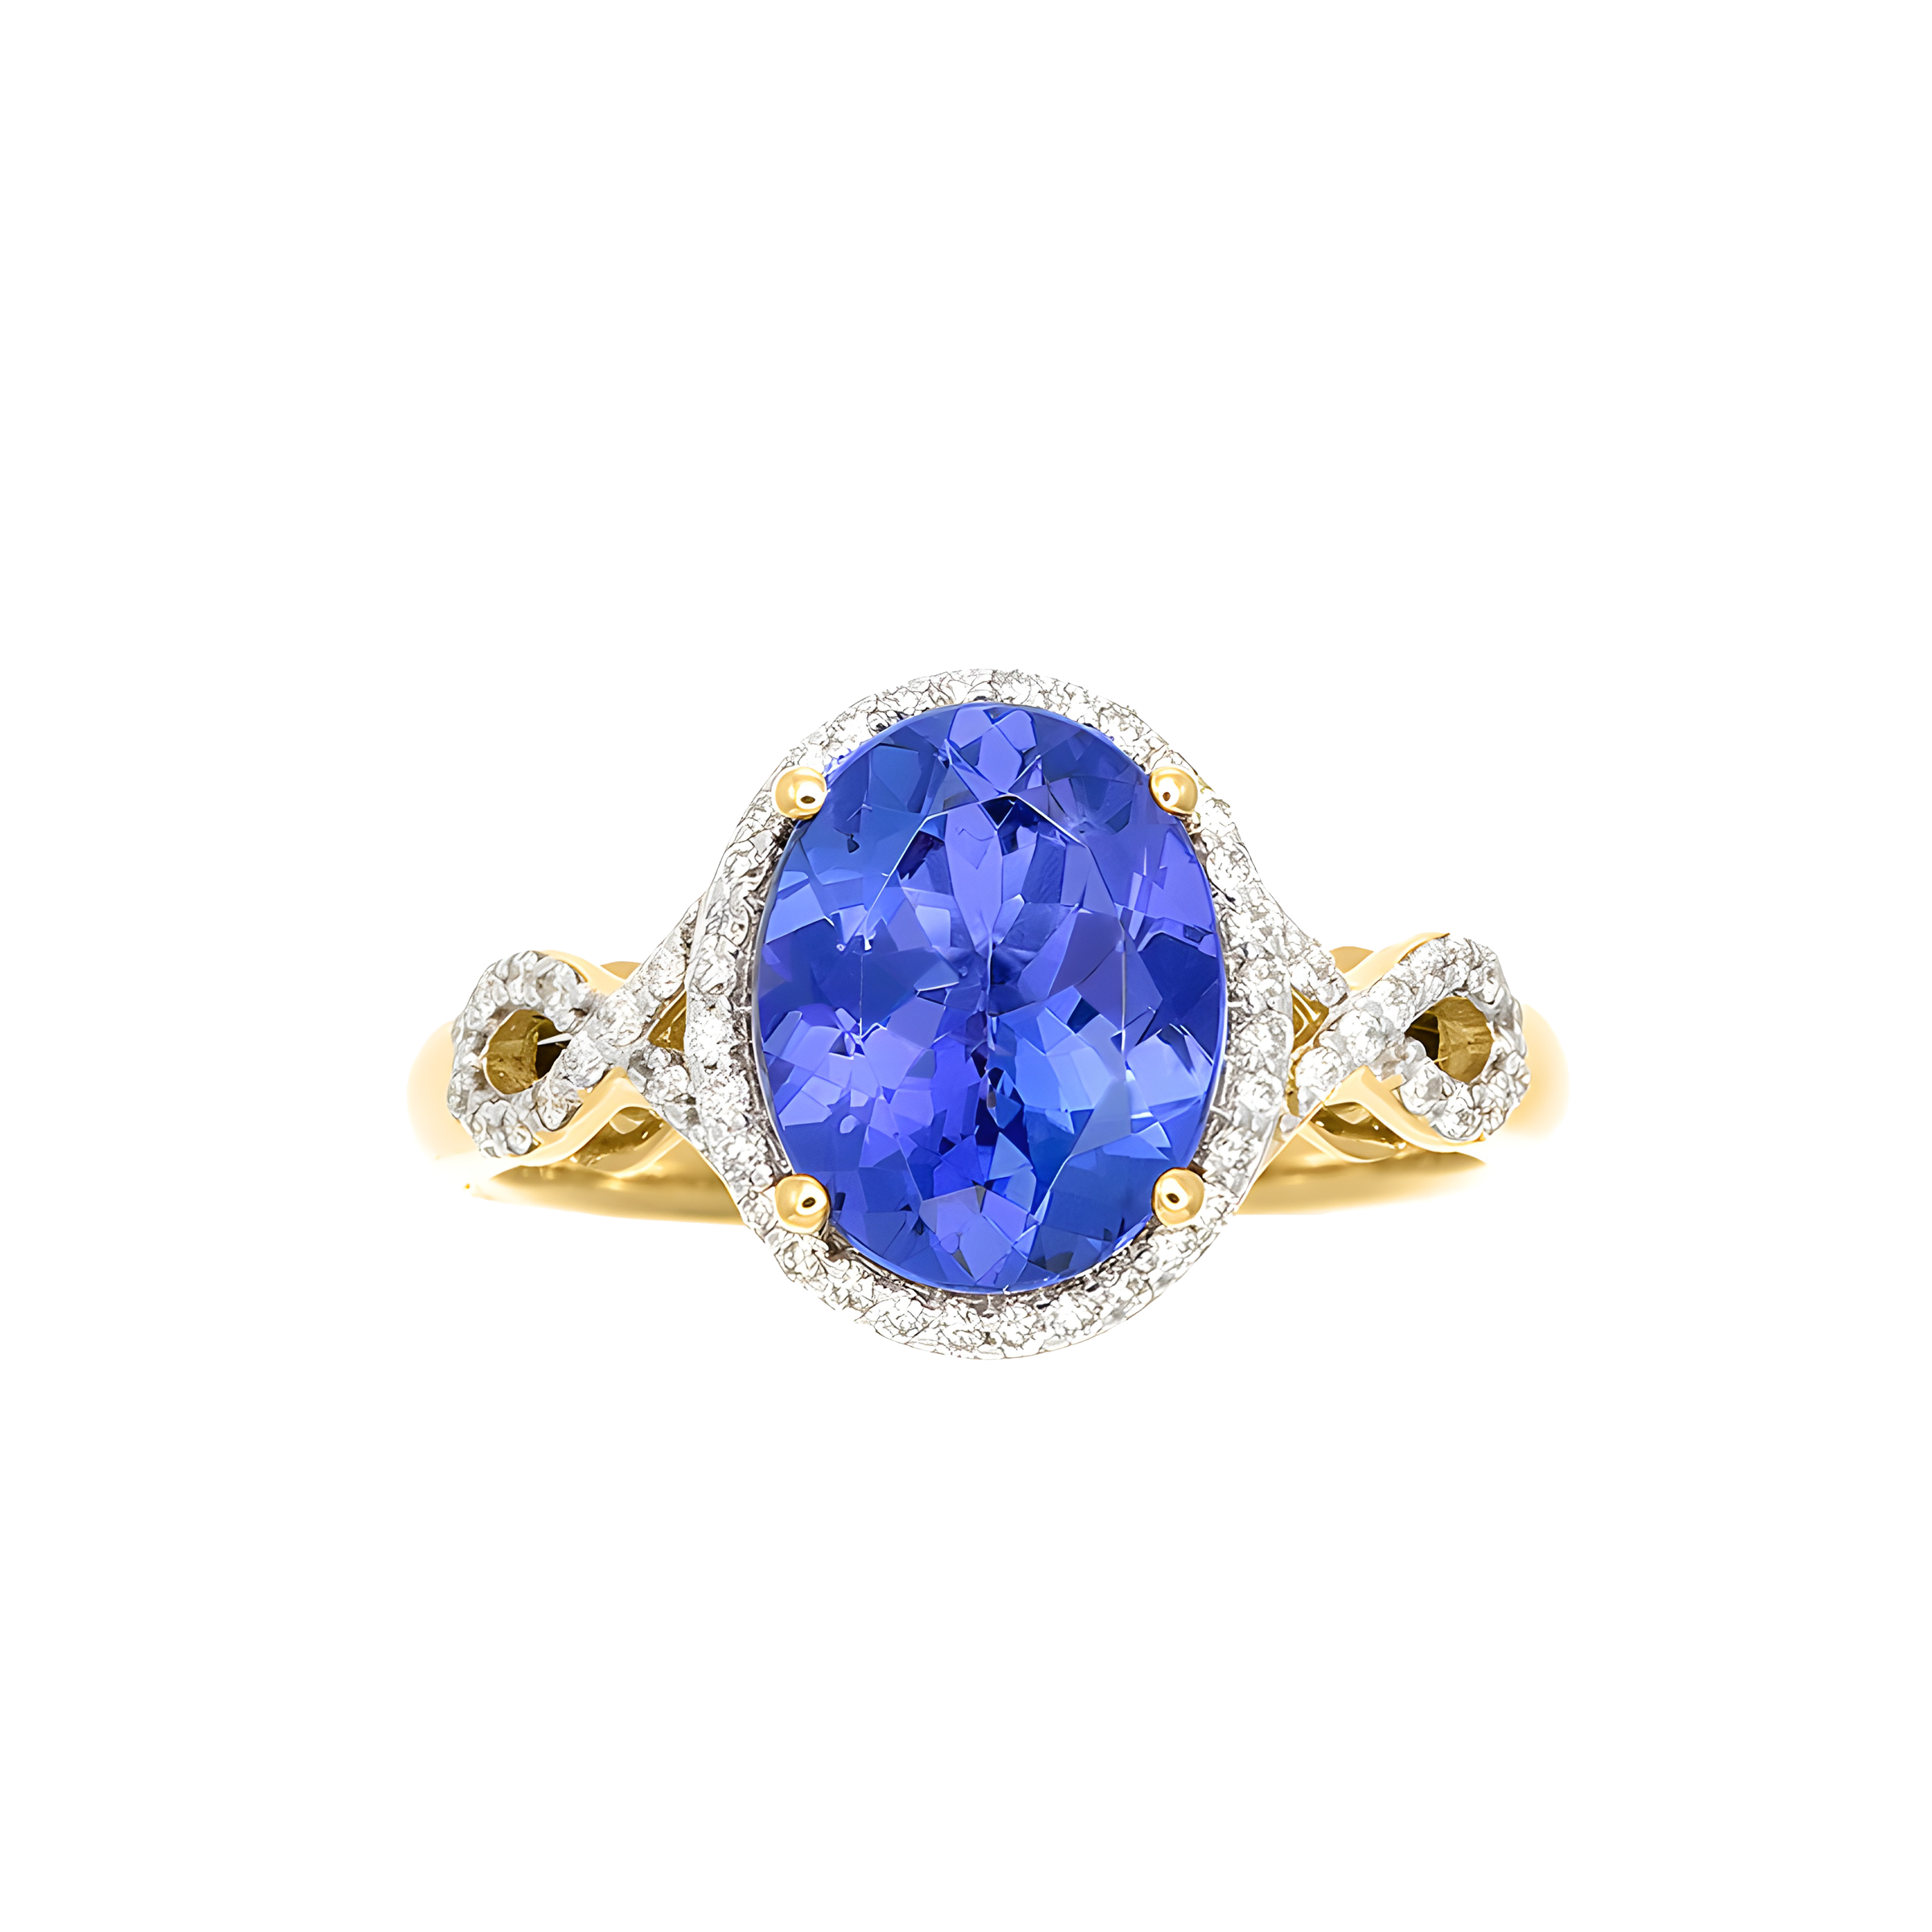 Oval Tanzanite and Diamond Ring in 18K Yellow Gold